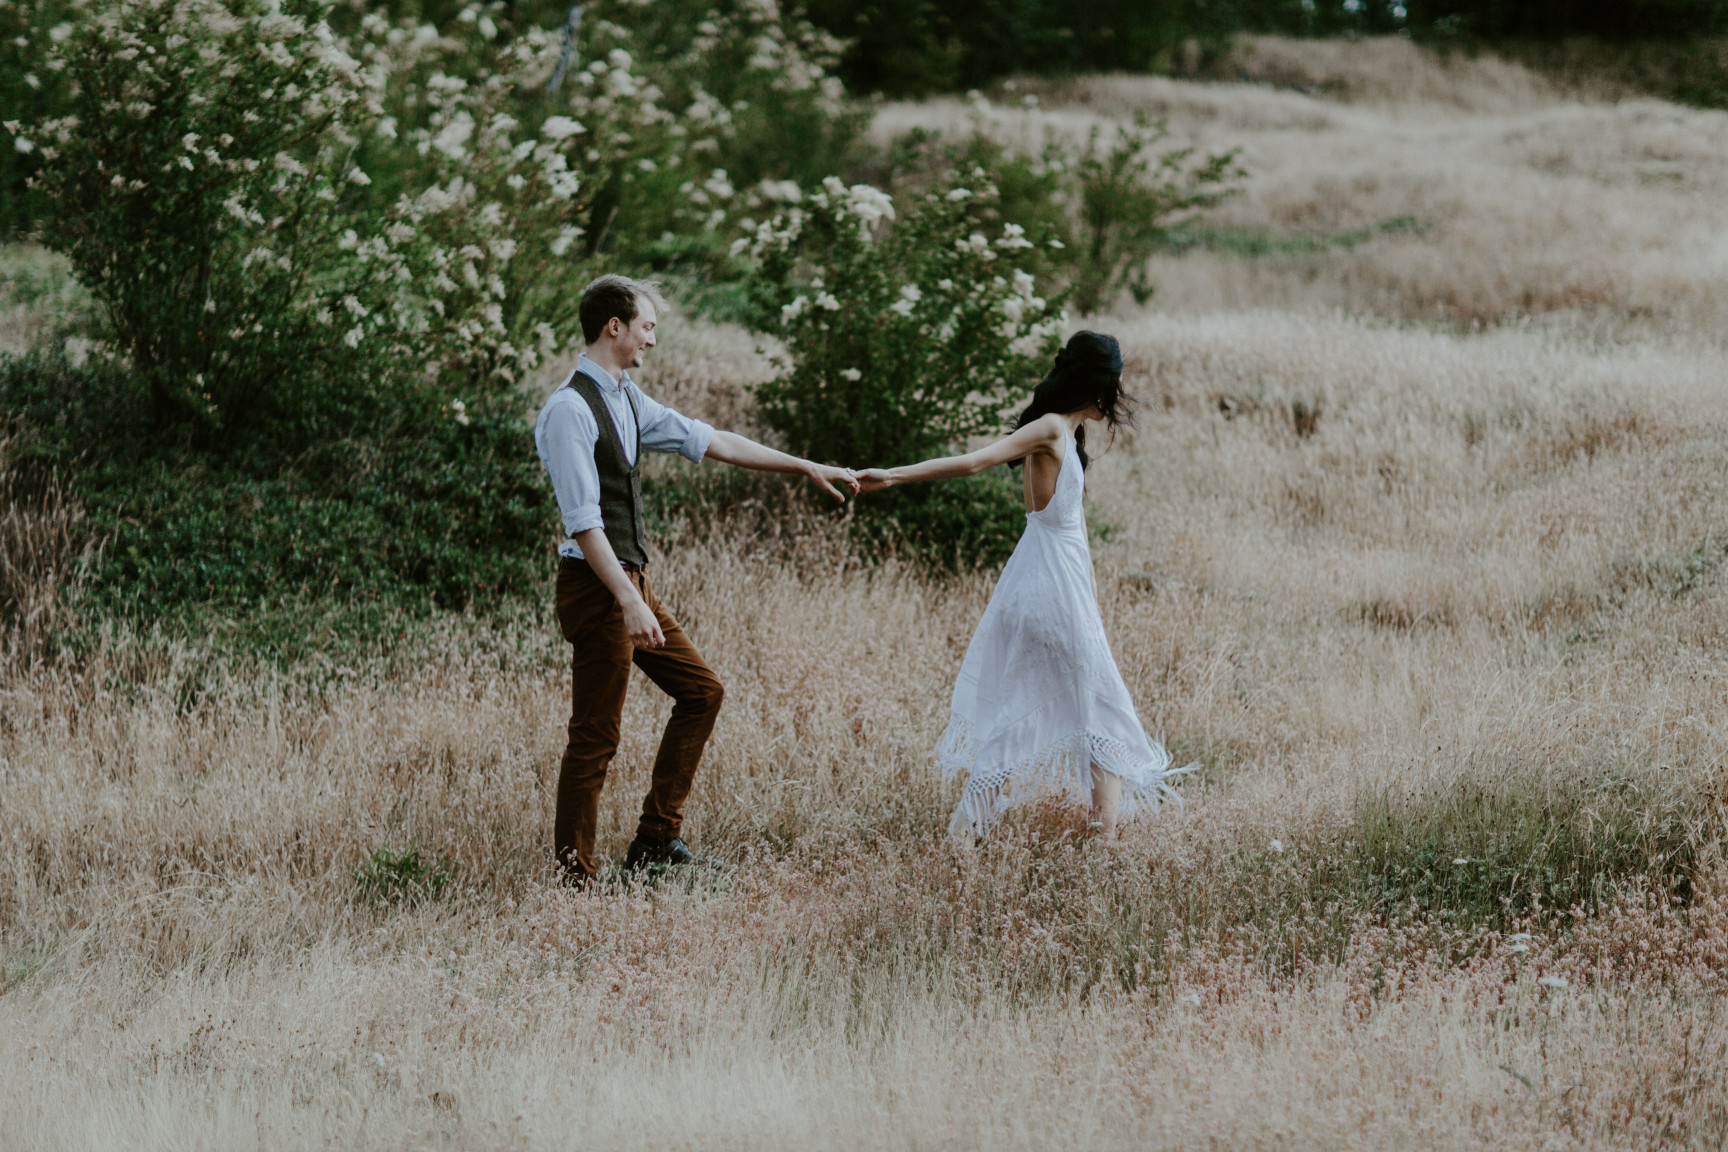 Jacob and Kimberlie walk through the grass at Cascade Locks, OR. Elopement wedding photography at Cascade Locks by Sienna Plus Josh.